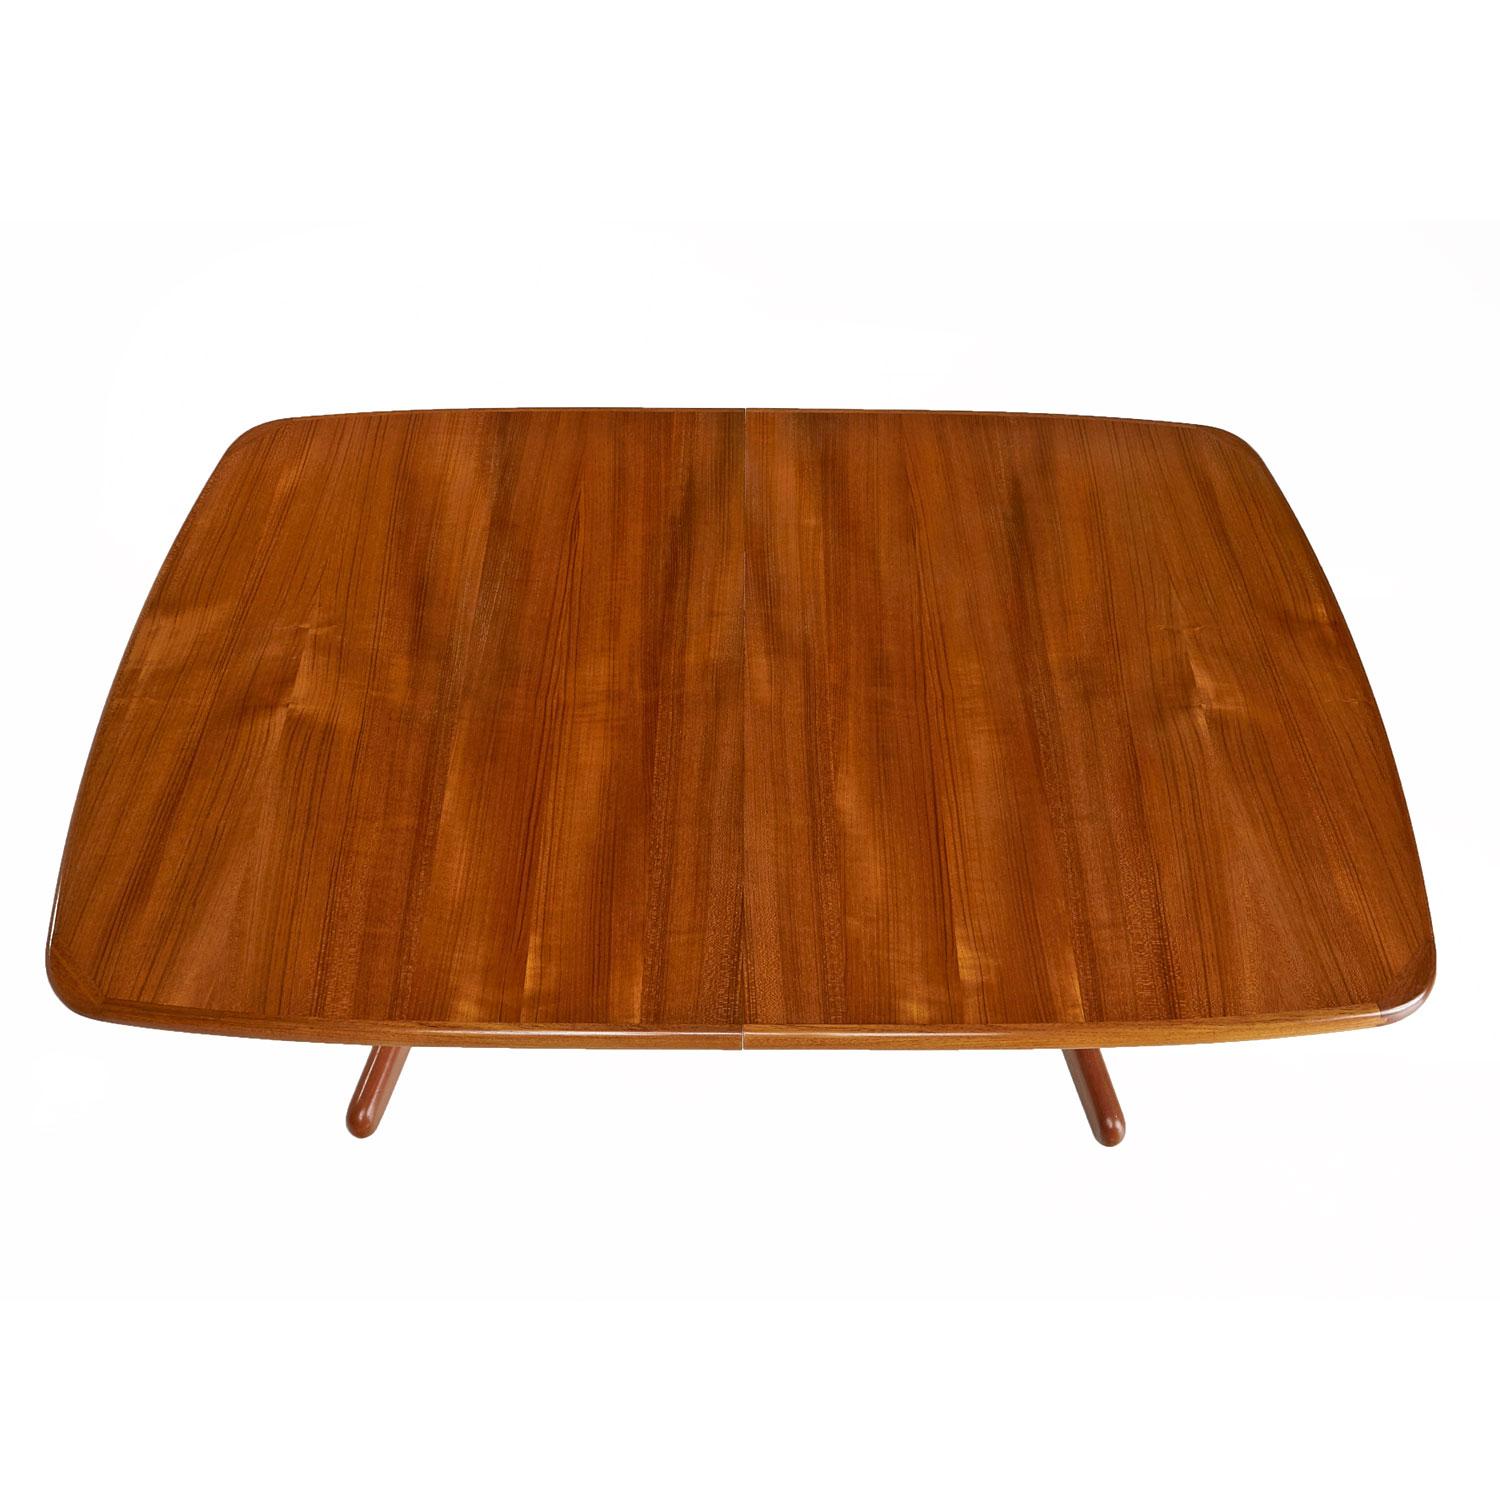 Vintage Danish teak trestle base dining table with two table leaf inserts to expand length. This table has a beautiful tiger stripe effect to the decades old teak wood. This versatile table allows one to customize the length by using the table at